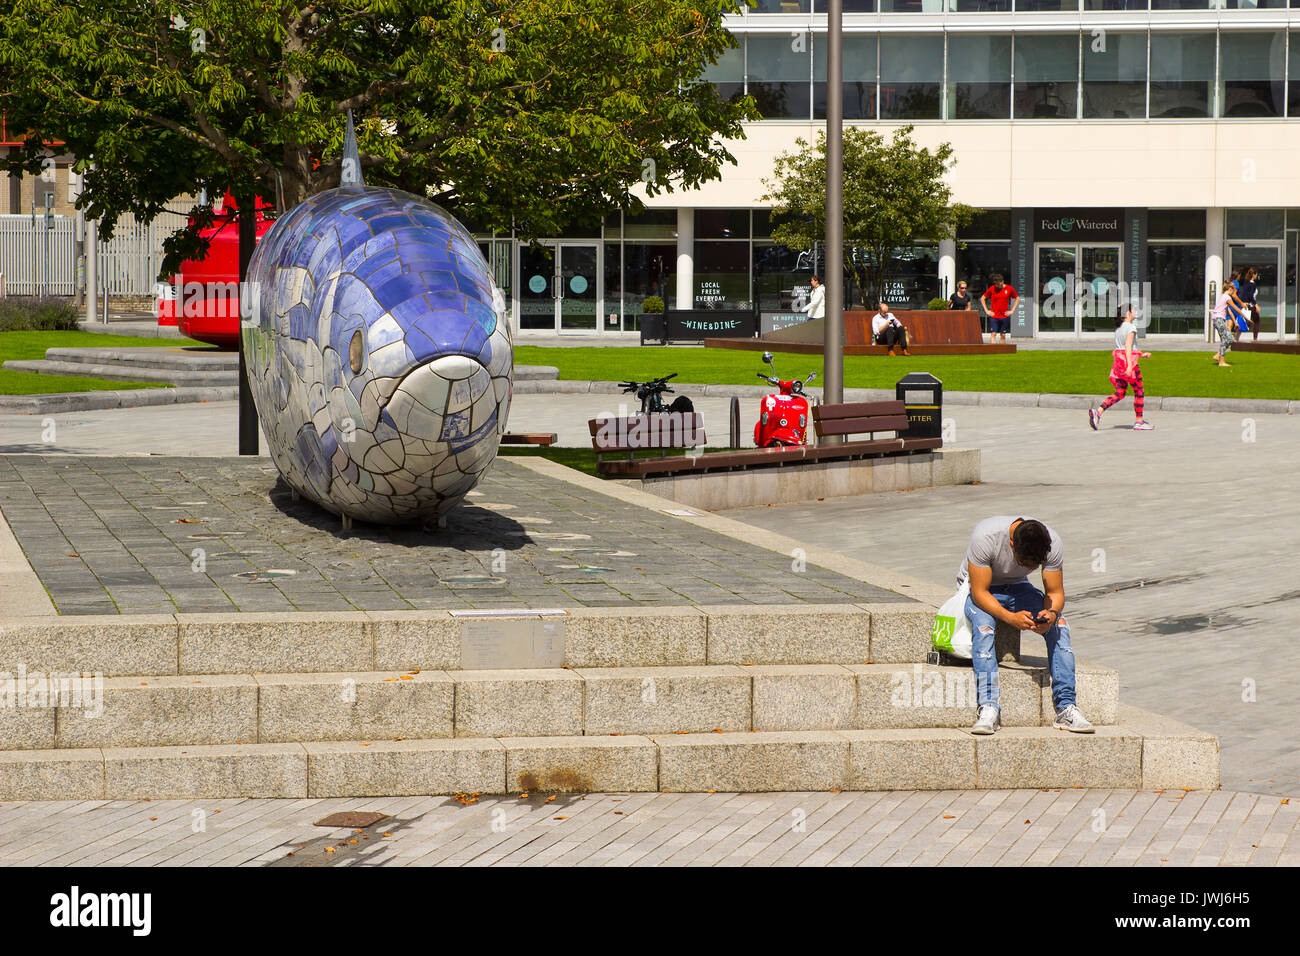 A young man texting sits beside the large fish sculpture on the Donegall Quay in the harbour area of Belfast, Northern Ireland Stock Photo